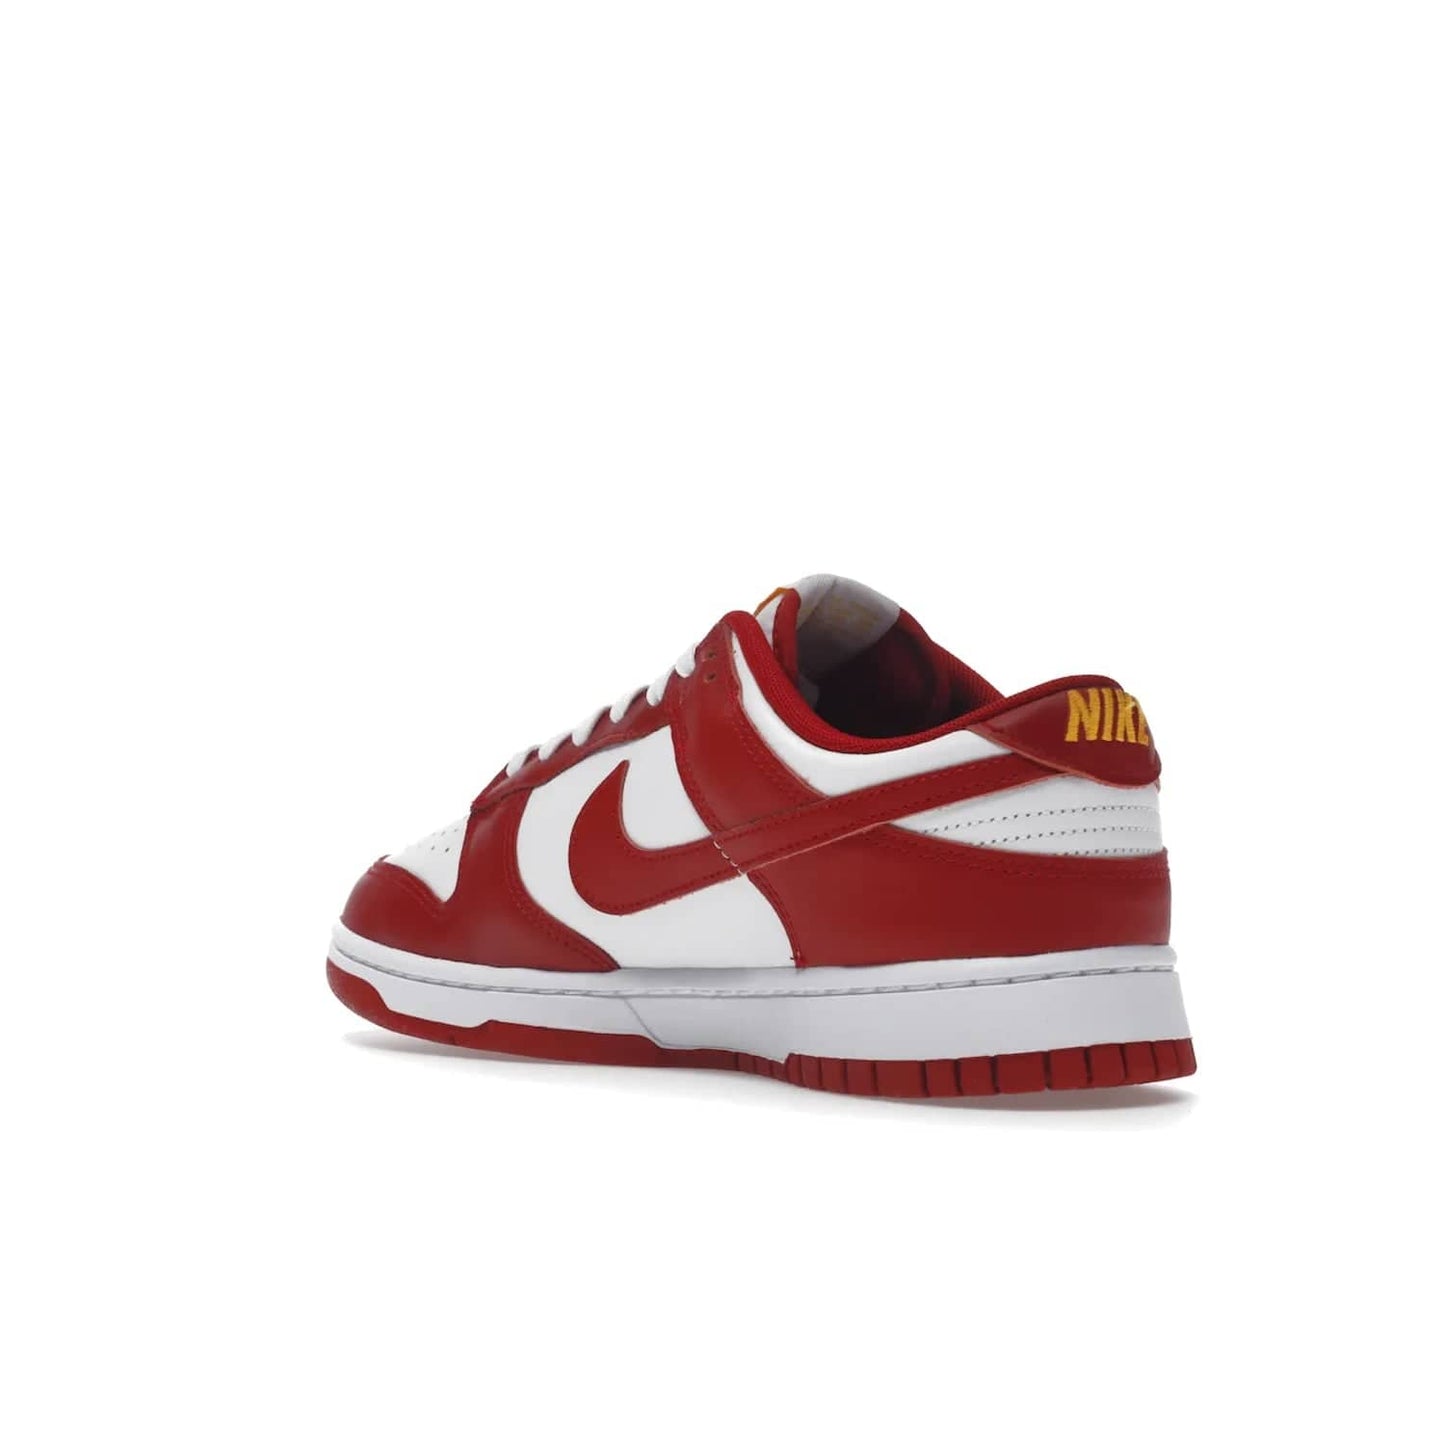 Nike Dunk Low USC - Image 24 - Only at www.BallersClubKickz.com - The Nike Dunk Low USC DD1391-602 colorway captures the eye of University of Southern California fans. Crafted with leather and rubber upper and outsole, this stylish sneaker features a white, gym red, and yellow colorway. With yellow Nike branding, white perforated vamp, and red suede Swoosh, this sneaker turns heads. Get the classic Nike Dunk Low USC releasing on November 9th, 2022.